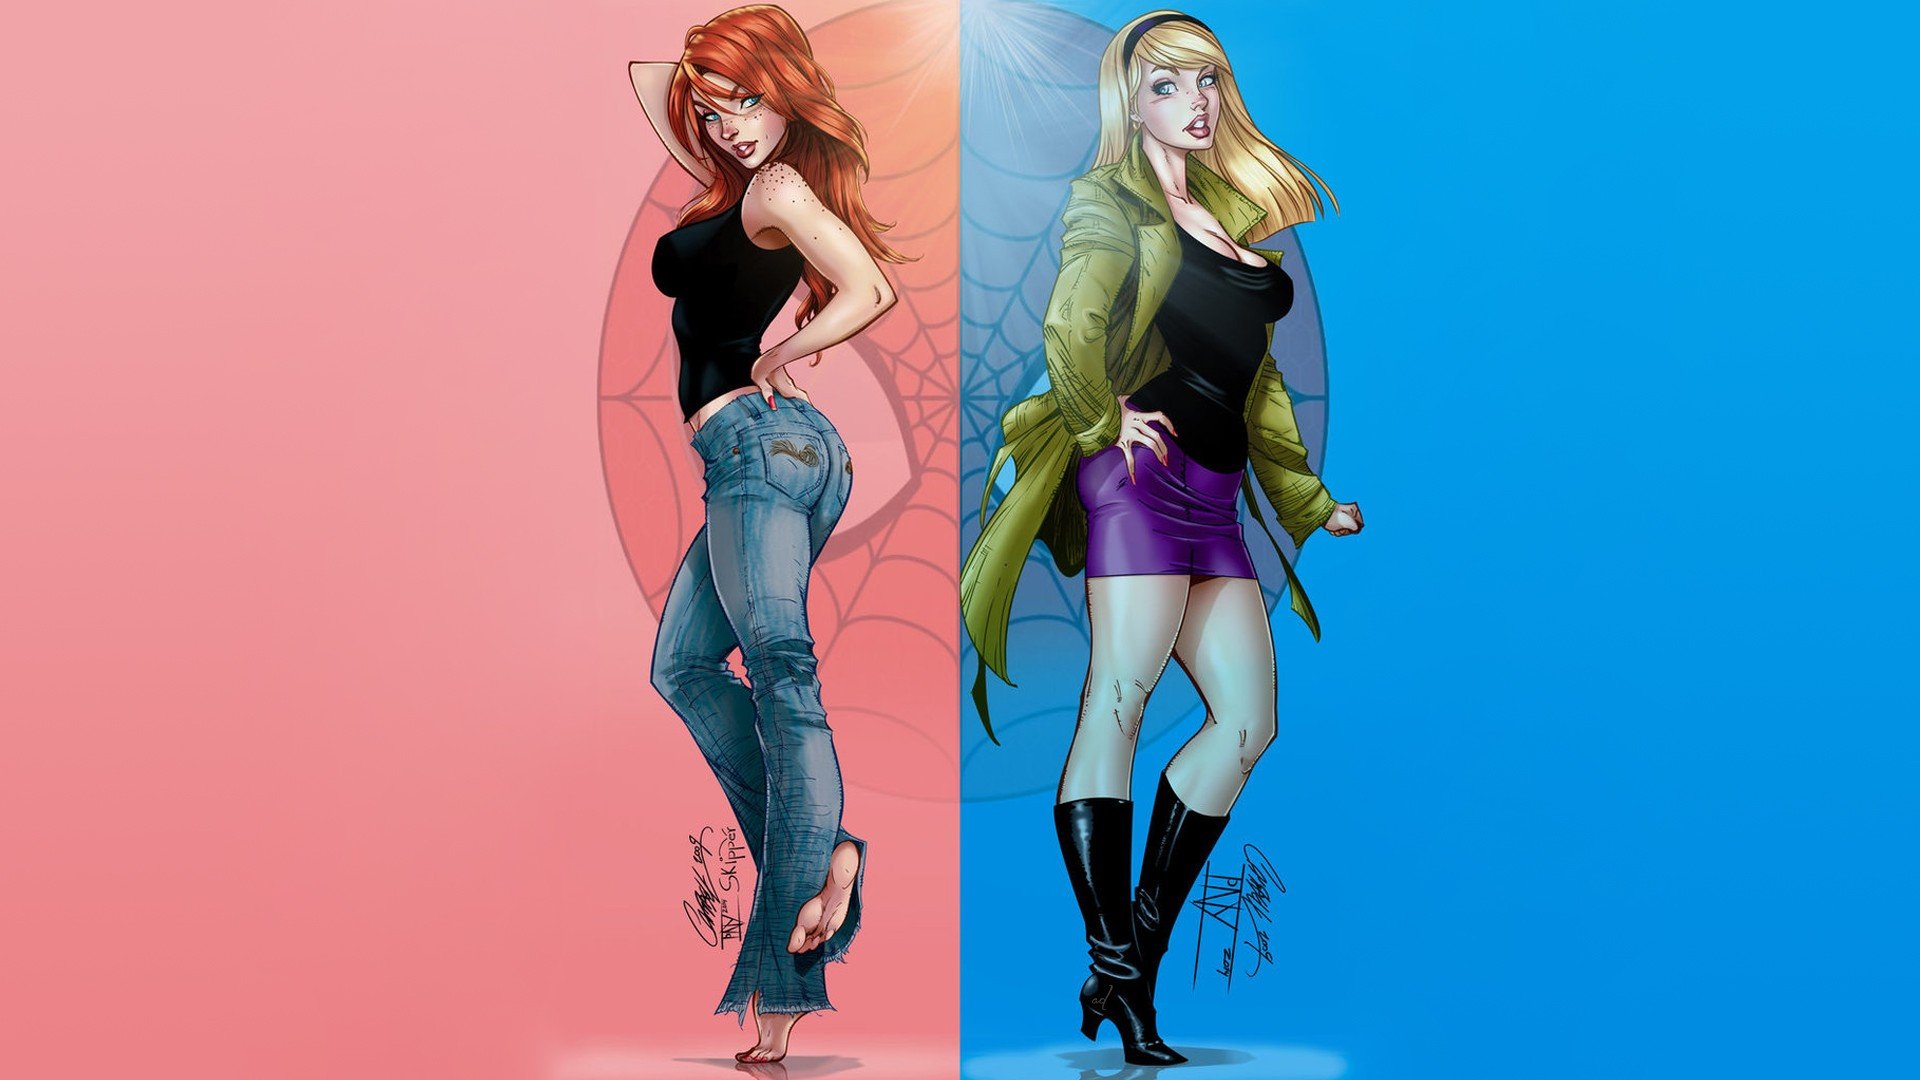 Mary Jane, Gwen Stacy, J. Scott Campbell, Women, Spider Man, Marvel Comics,  Pink, Blue, Collage, Artwork HD Wallpapers / Desktop and Mobile Images &  Photos